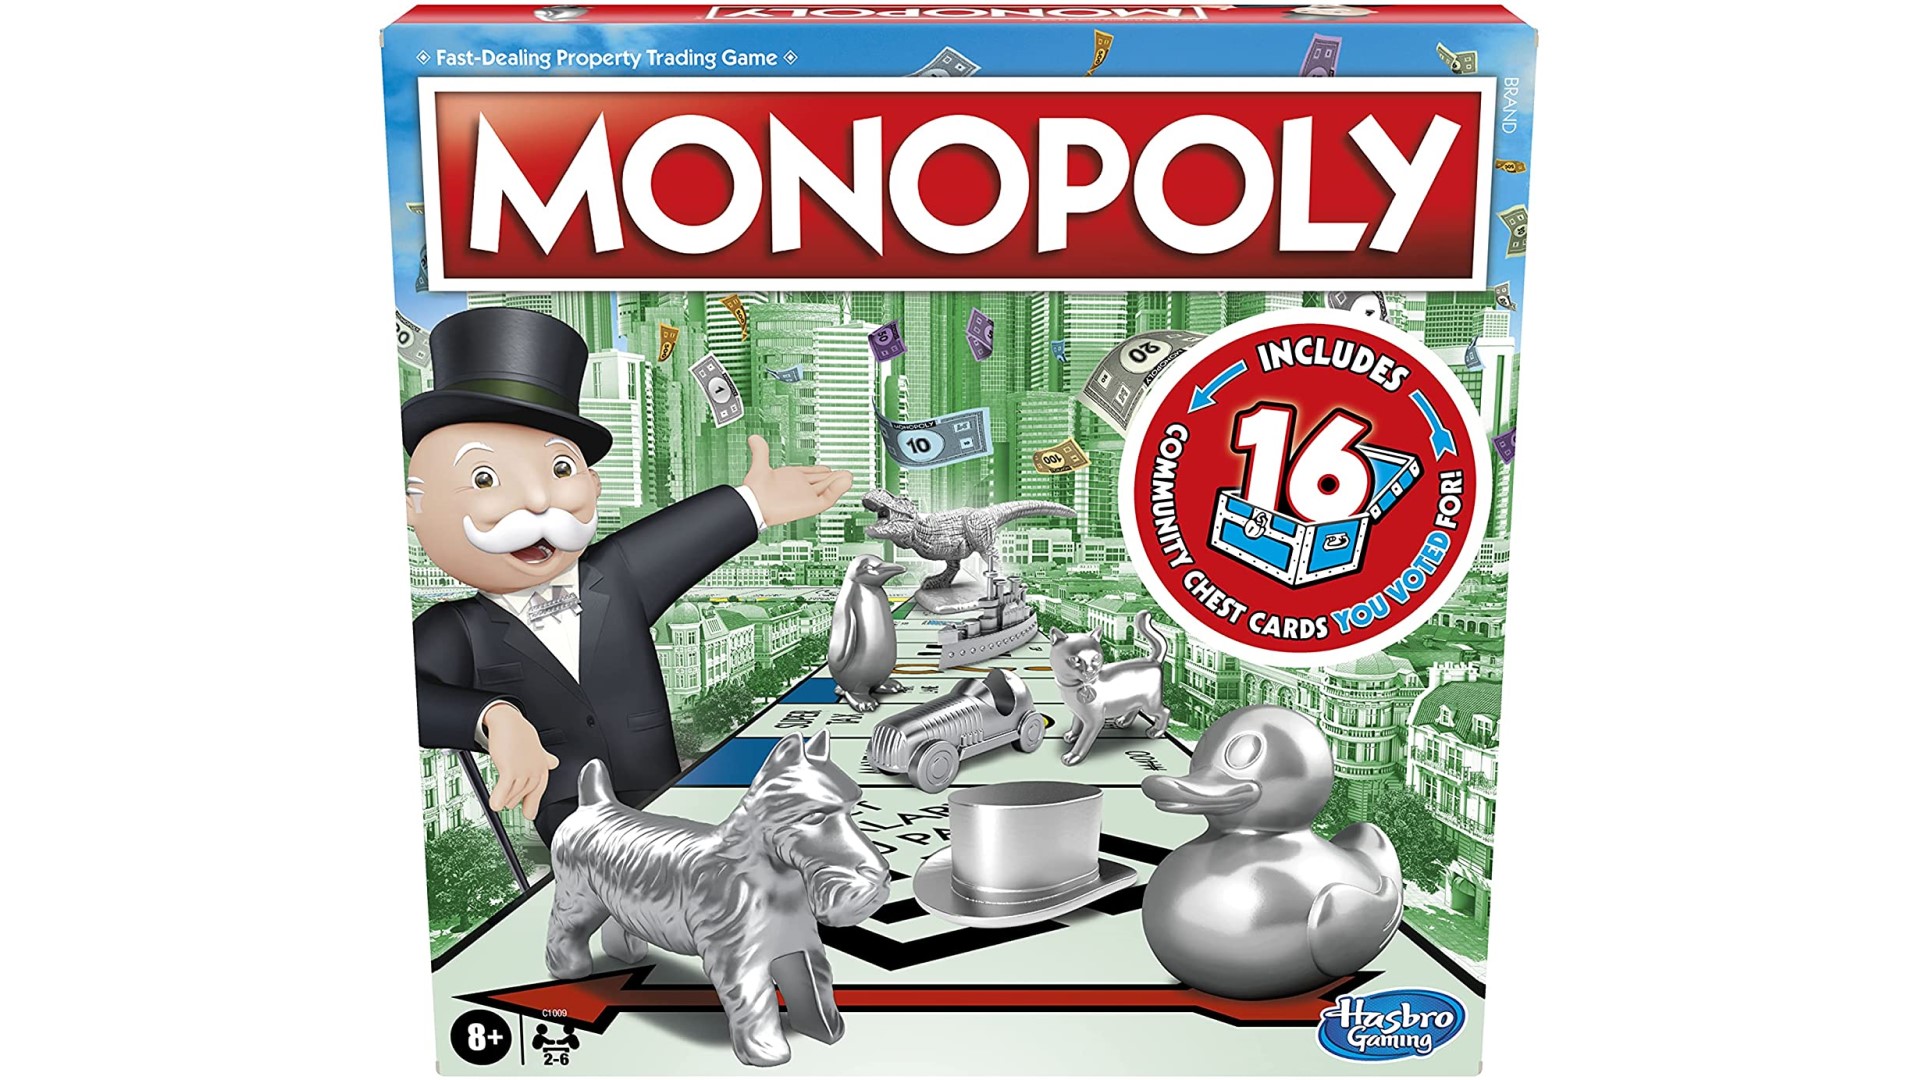 Best classic board games: Monopoly. Image shows the box.